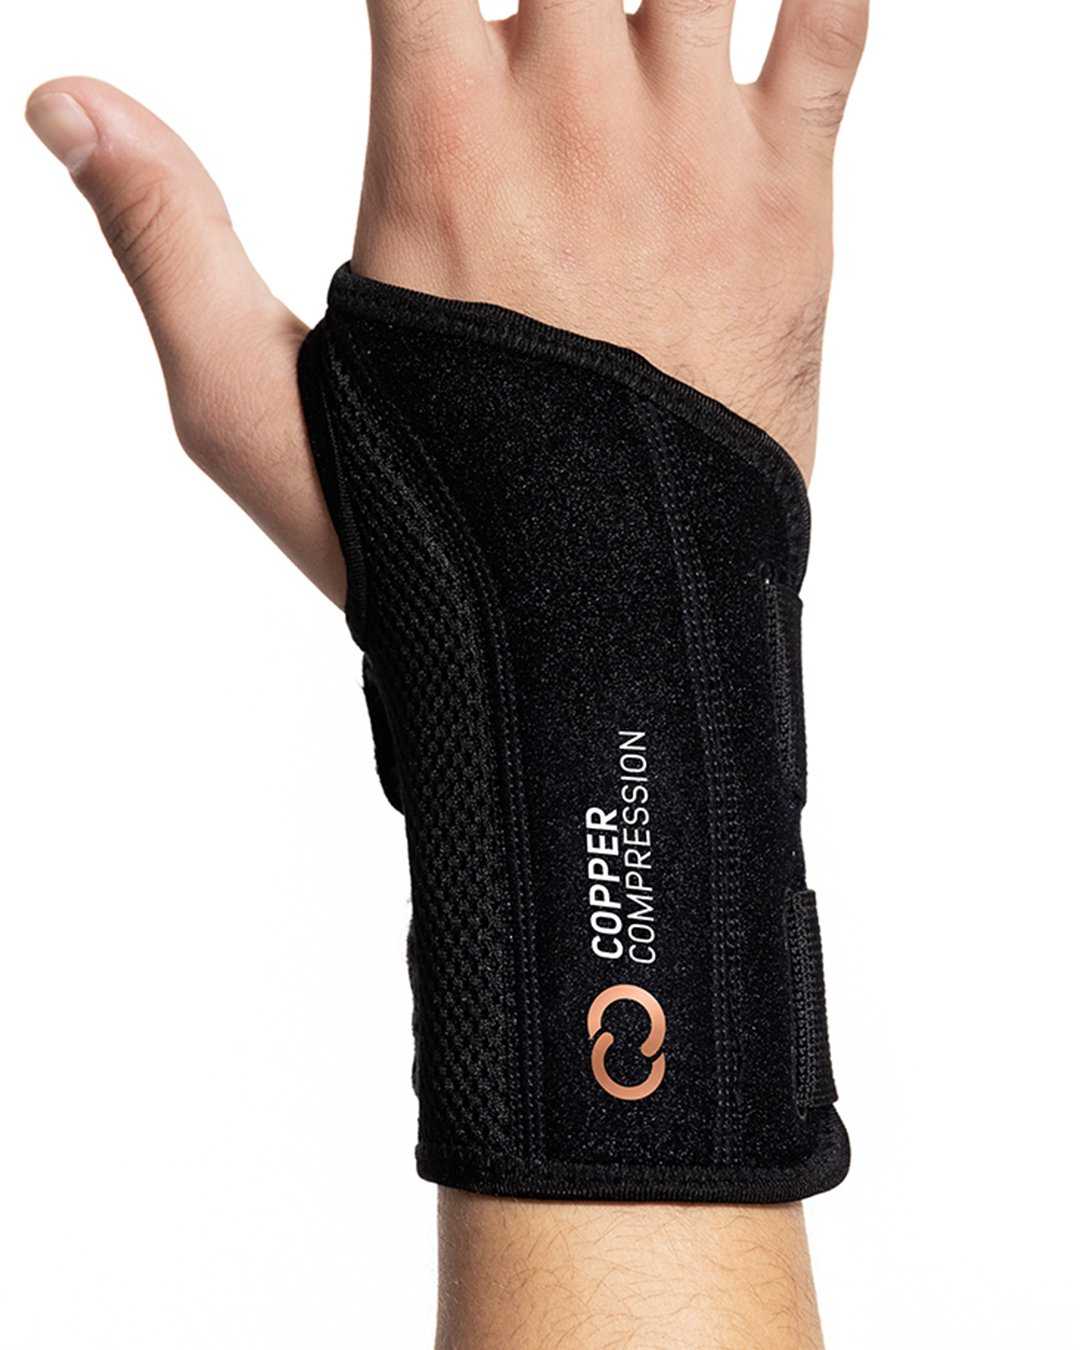 CFR Copper Wrist Support Compression Sleeves Guaranteed Braces for Carpal  Tunnel, RSI, Cubital Tunnel, Tendonitis, Arthritis, Wrist Sprains Support 